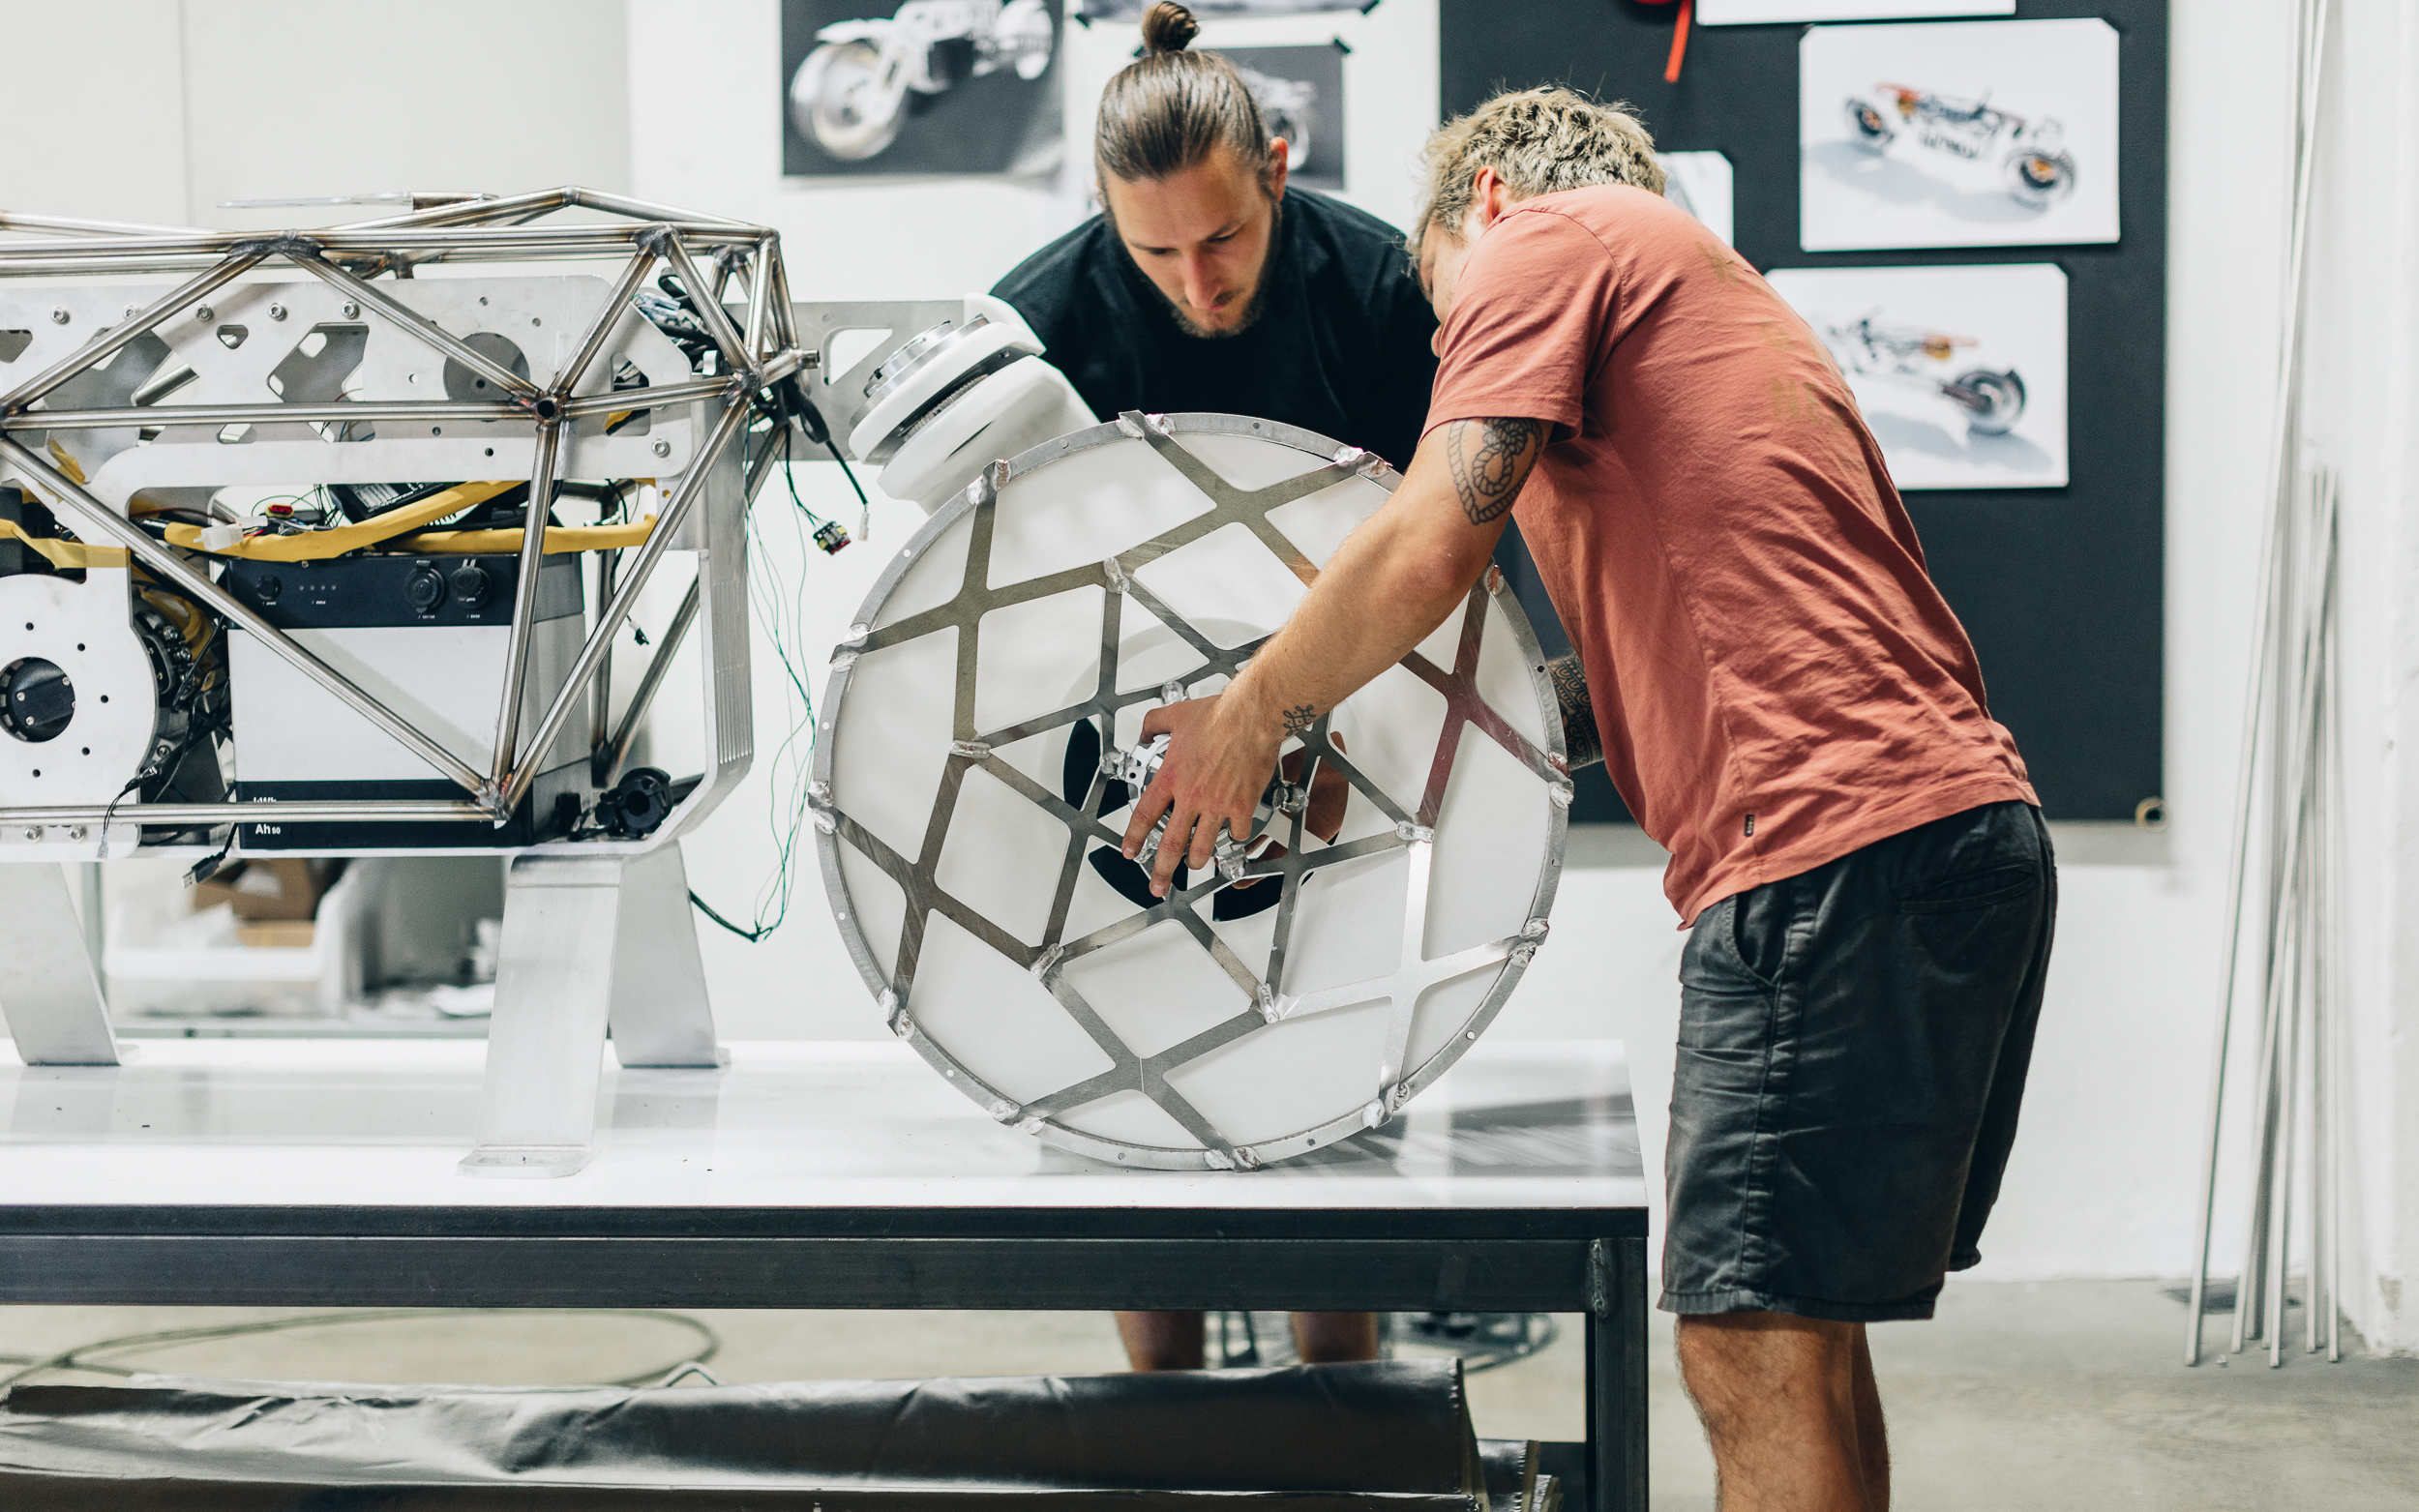 Nico Müller and his team install the 3D printed airless tire for the lunar motorcycle concept Tardigrade.